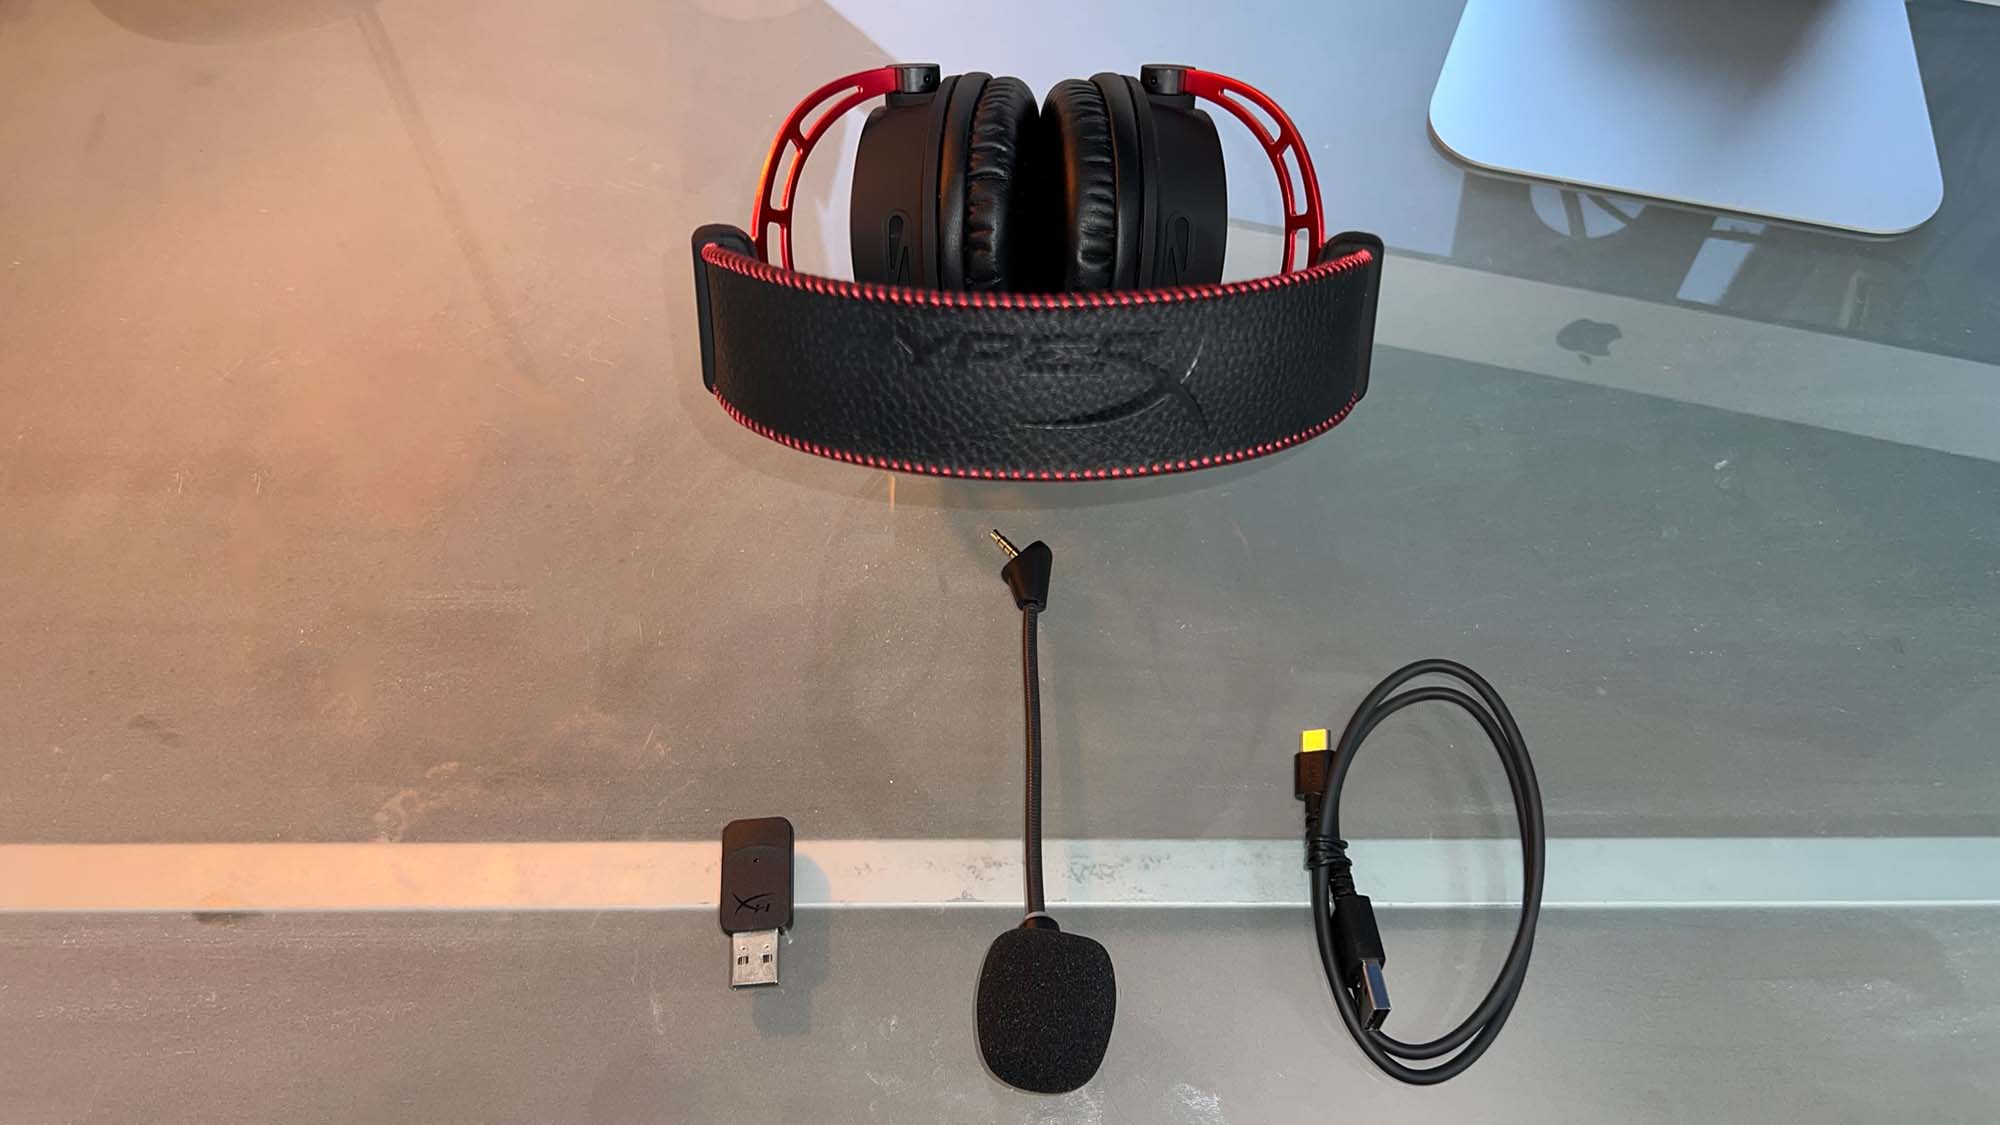 A HyperX Cloud Alpha Wireless gaming headset on a glass table